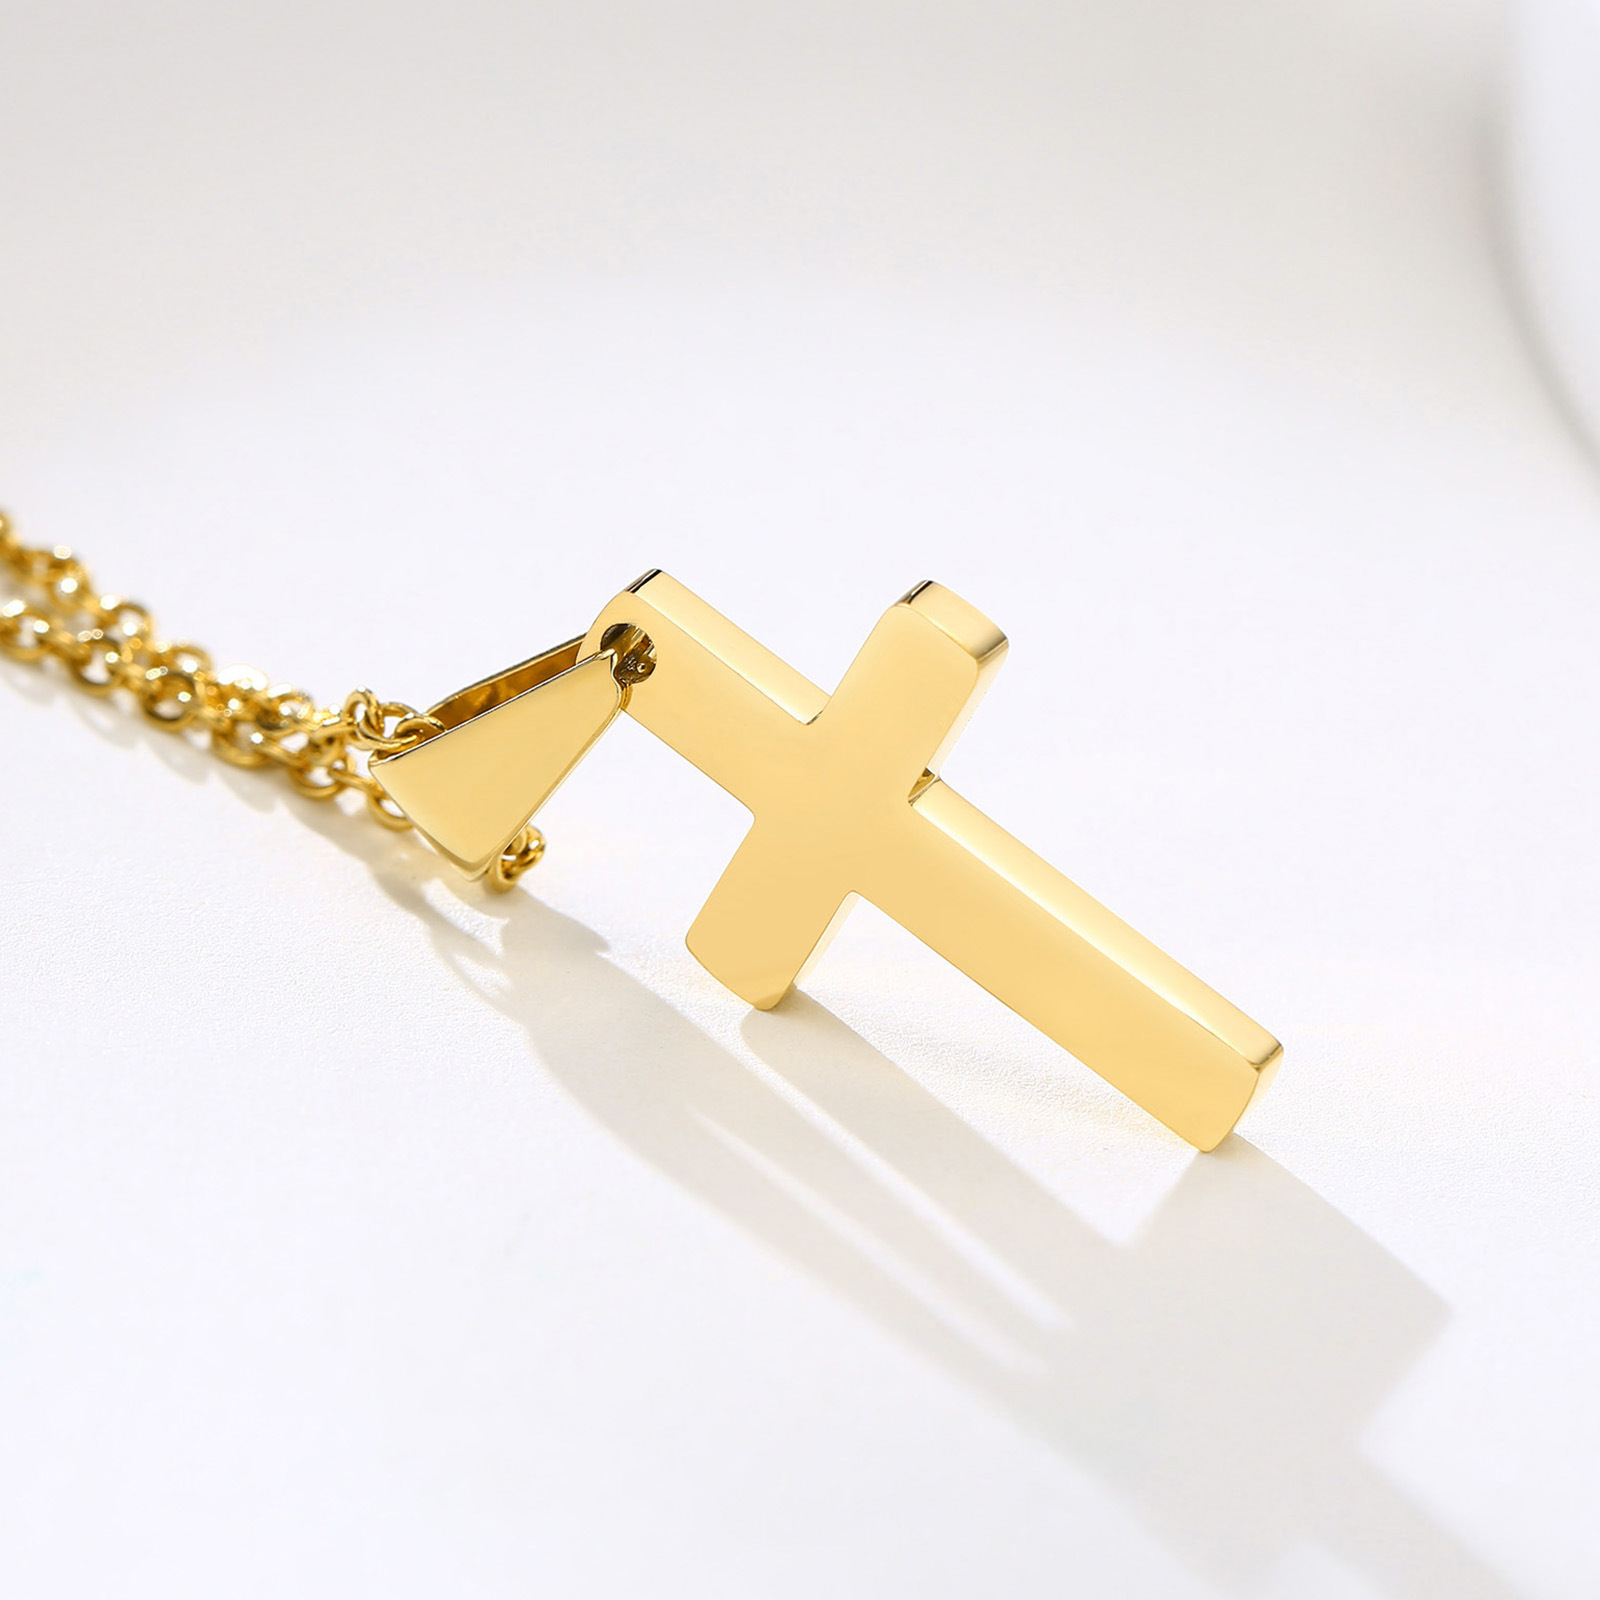 5:Gold, with chain